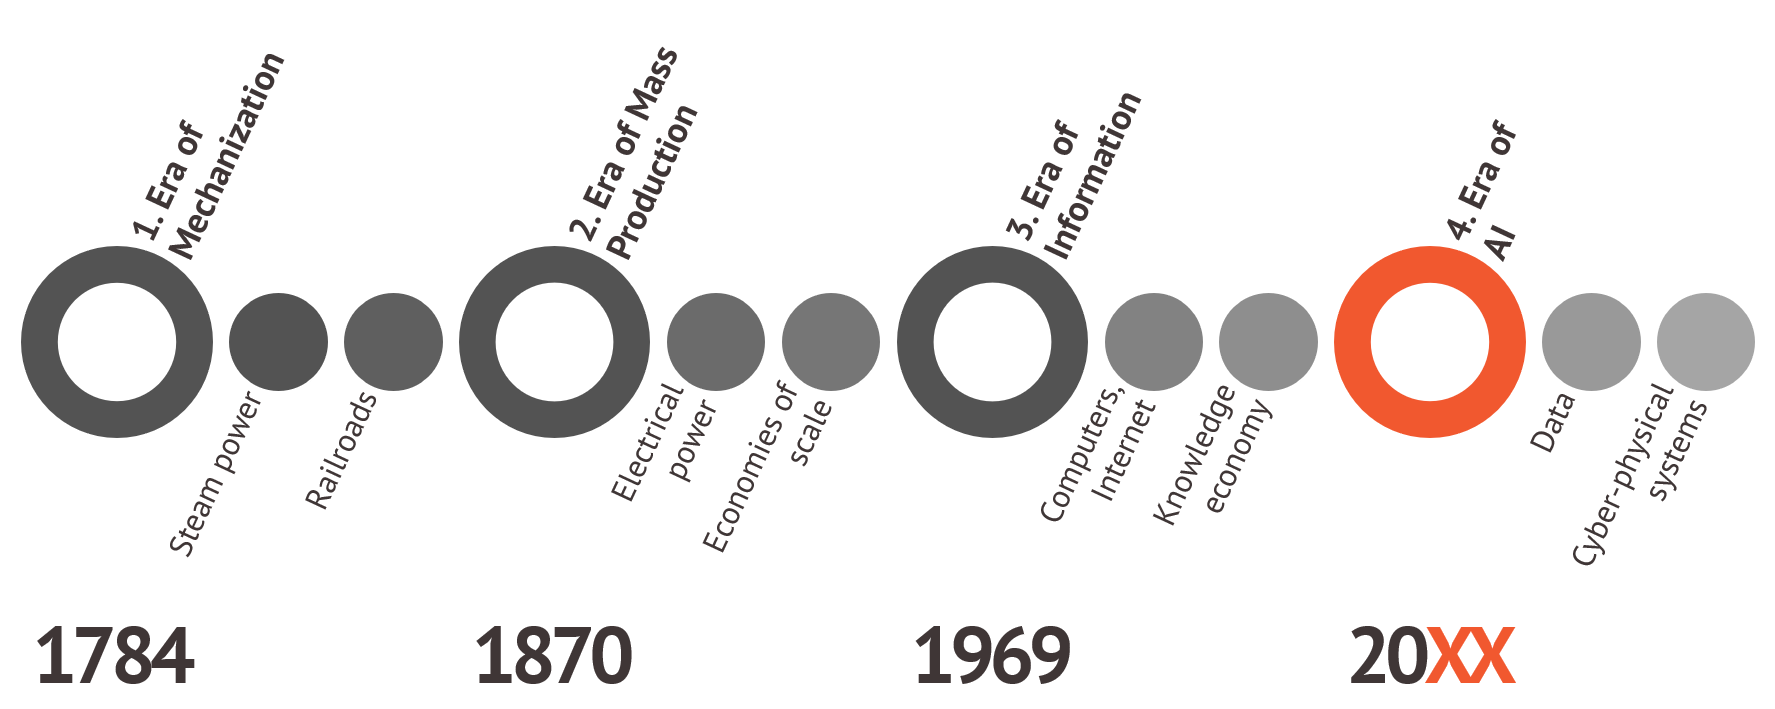 Figure 1 Timeline of the industrial revolutions